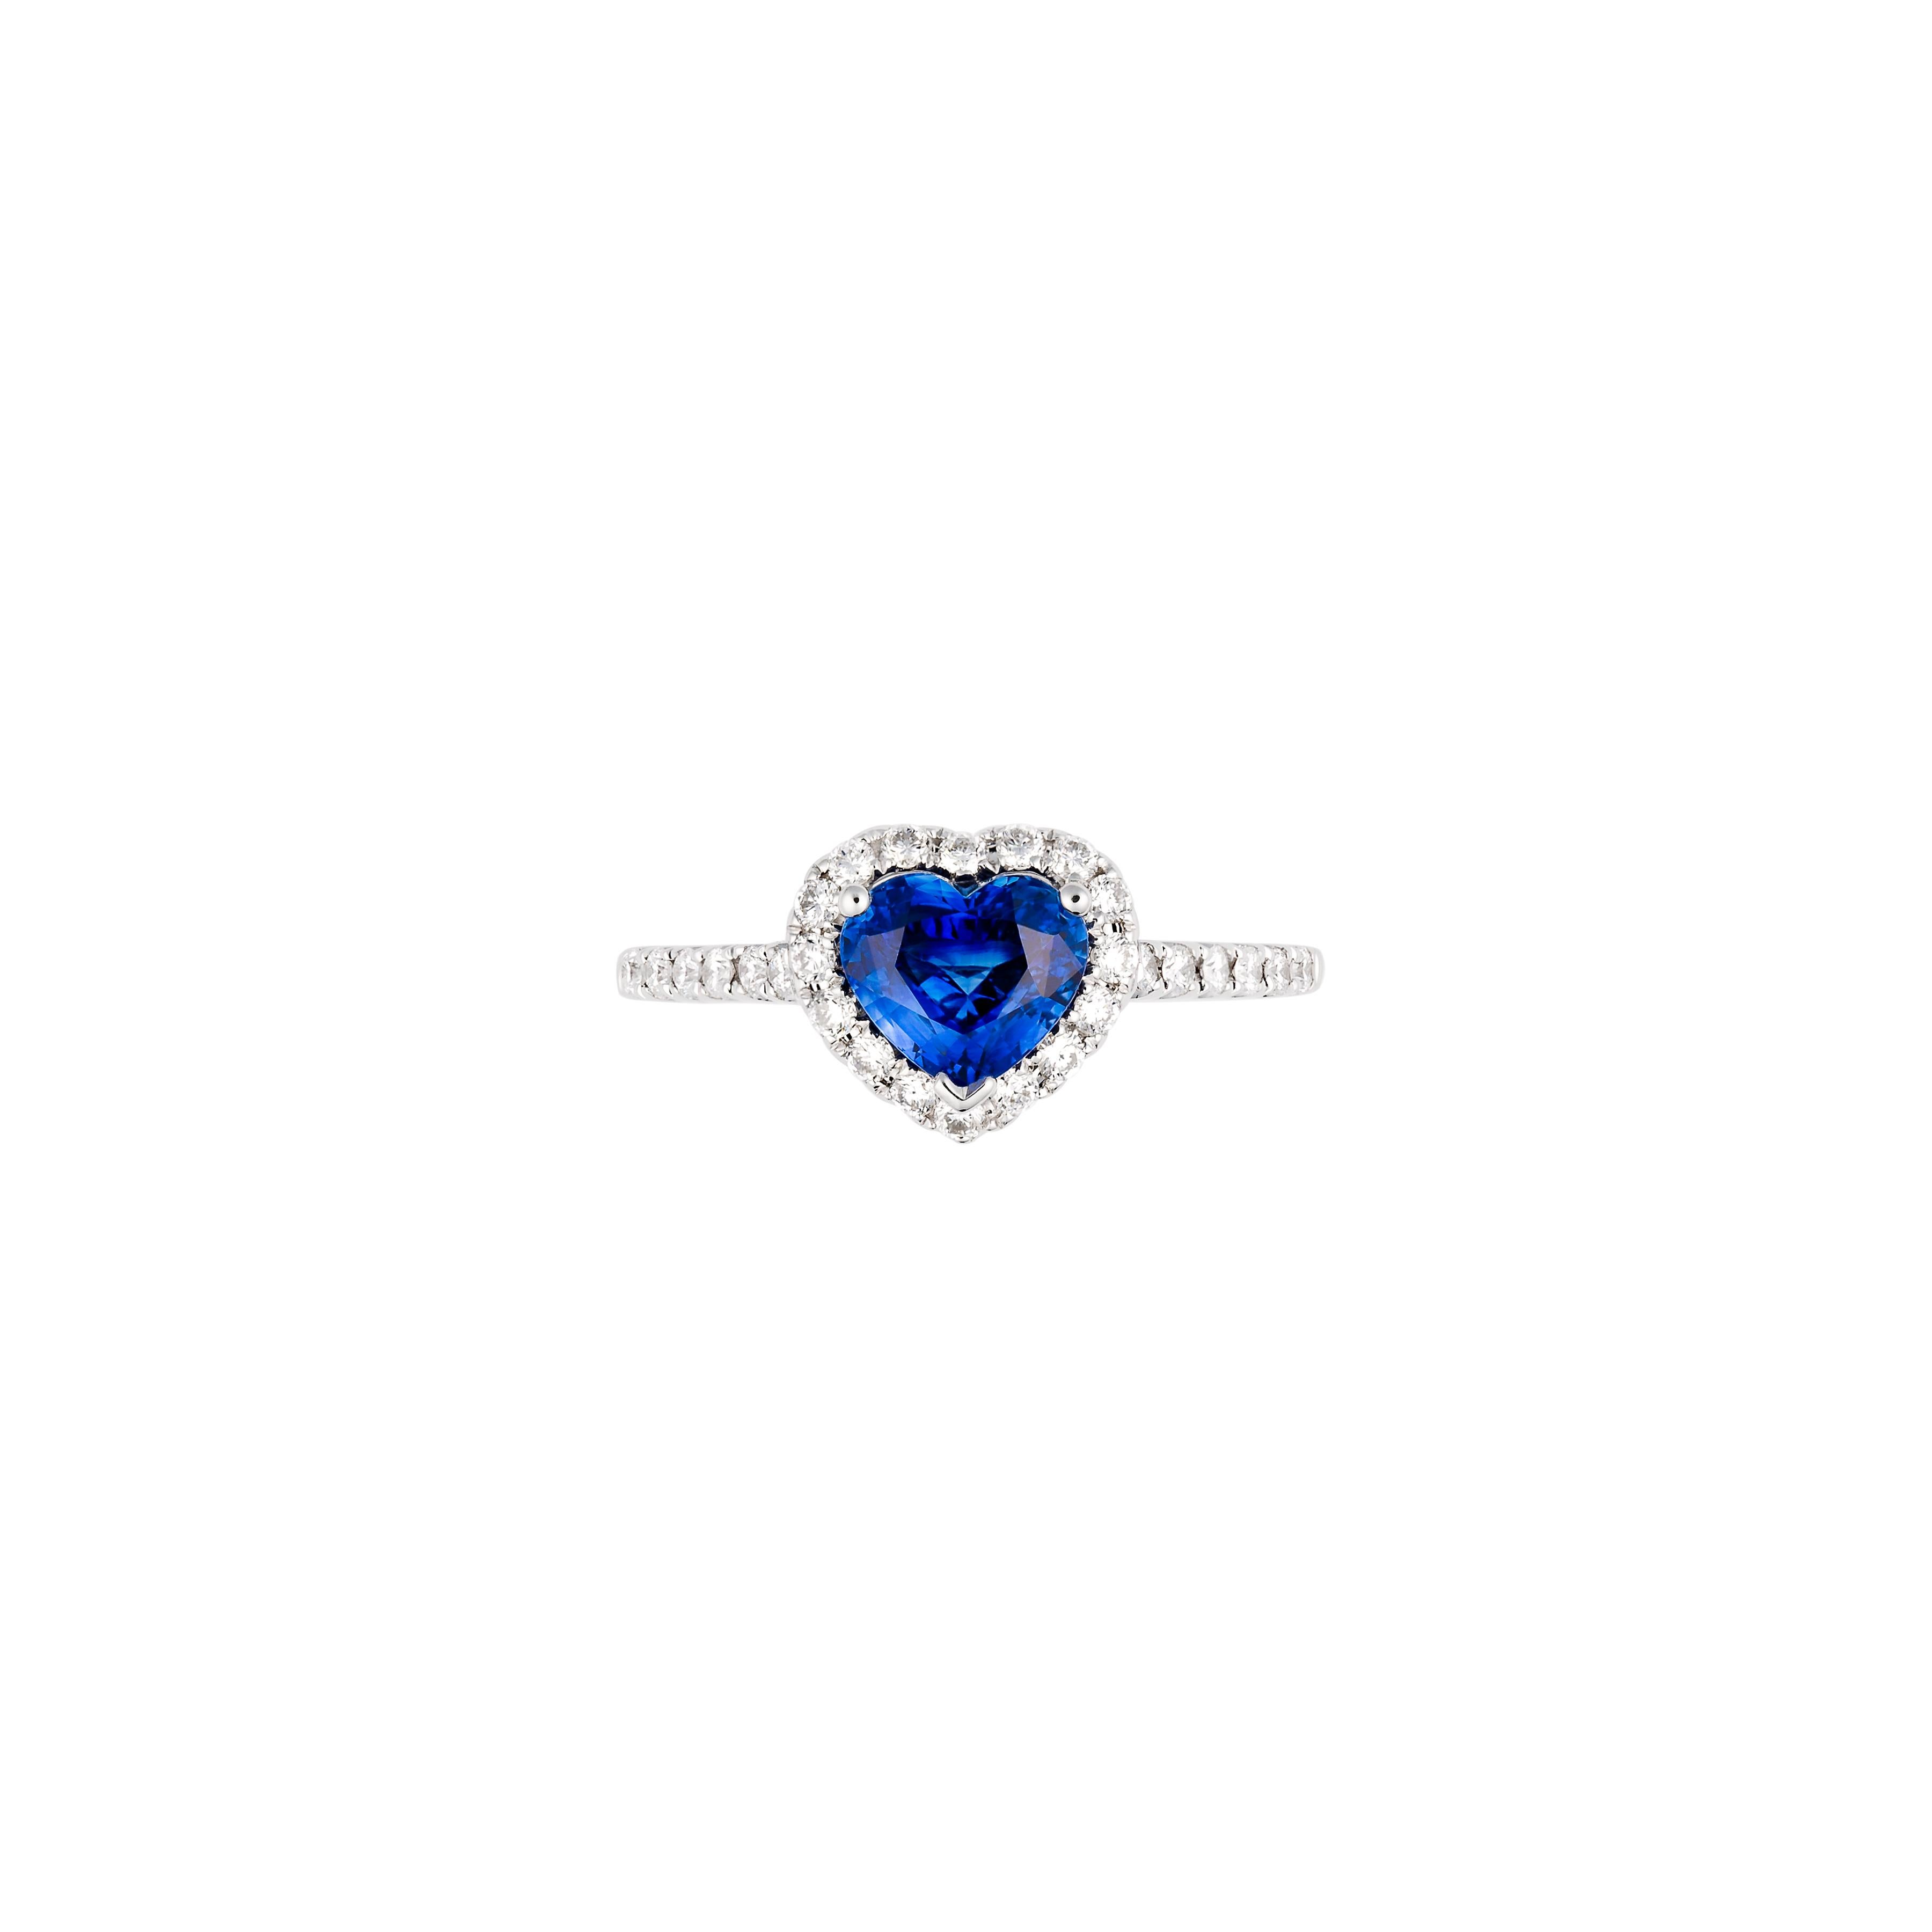 Fancy heart- shaped Kashmir blue Sapphire and diamond ring handcrafted in 18ct white gold. Known as the “Gem of Heaven” this intense velvety -blue colour Kashmir Sapphire has excellent brilliance and has a high level of durability. Cornflower blue